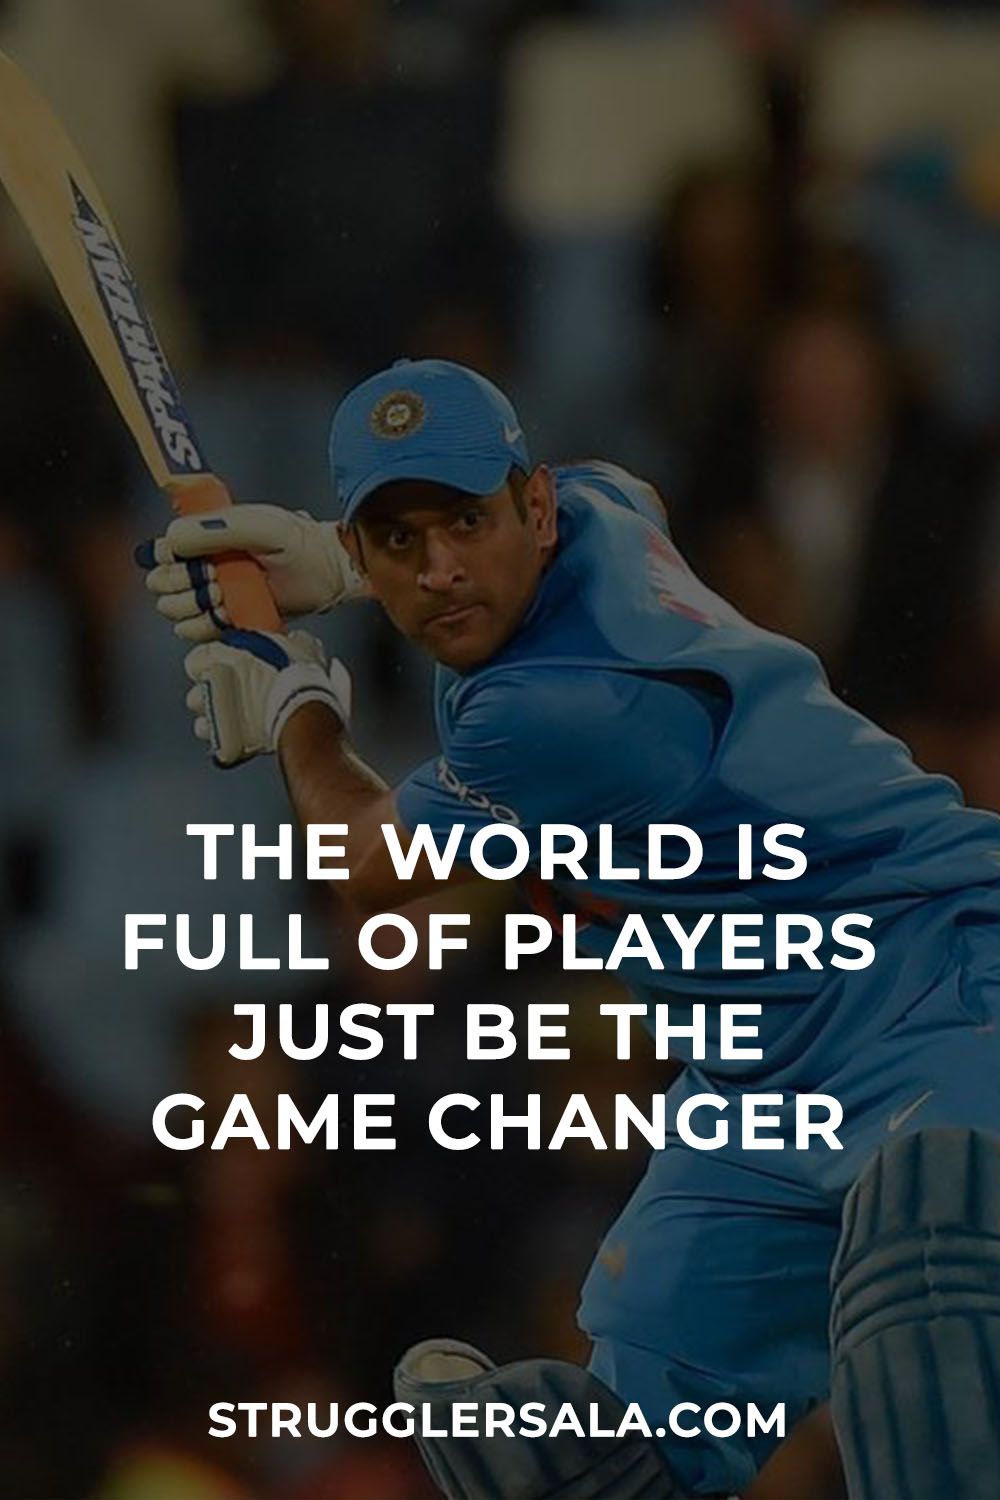 The World Is Full Of Players Just Be The Game Changer. Dhoni quotes, Ms dhoni wallpaper, Dhoni wallpaper